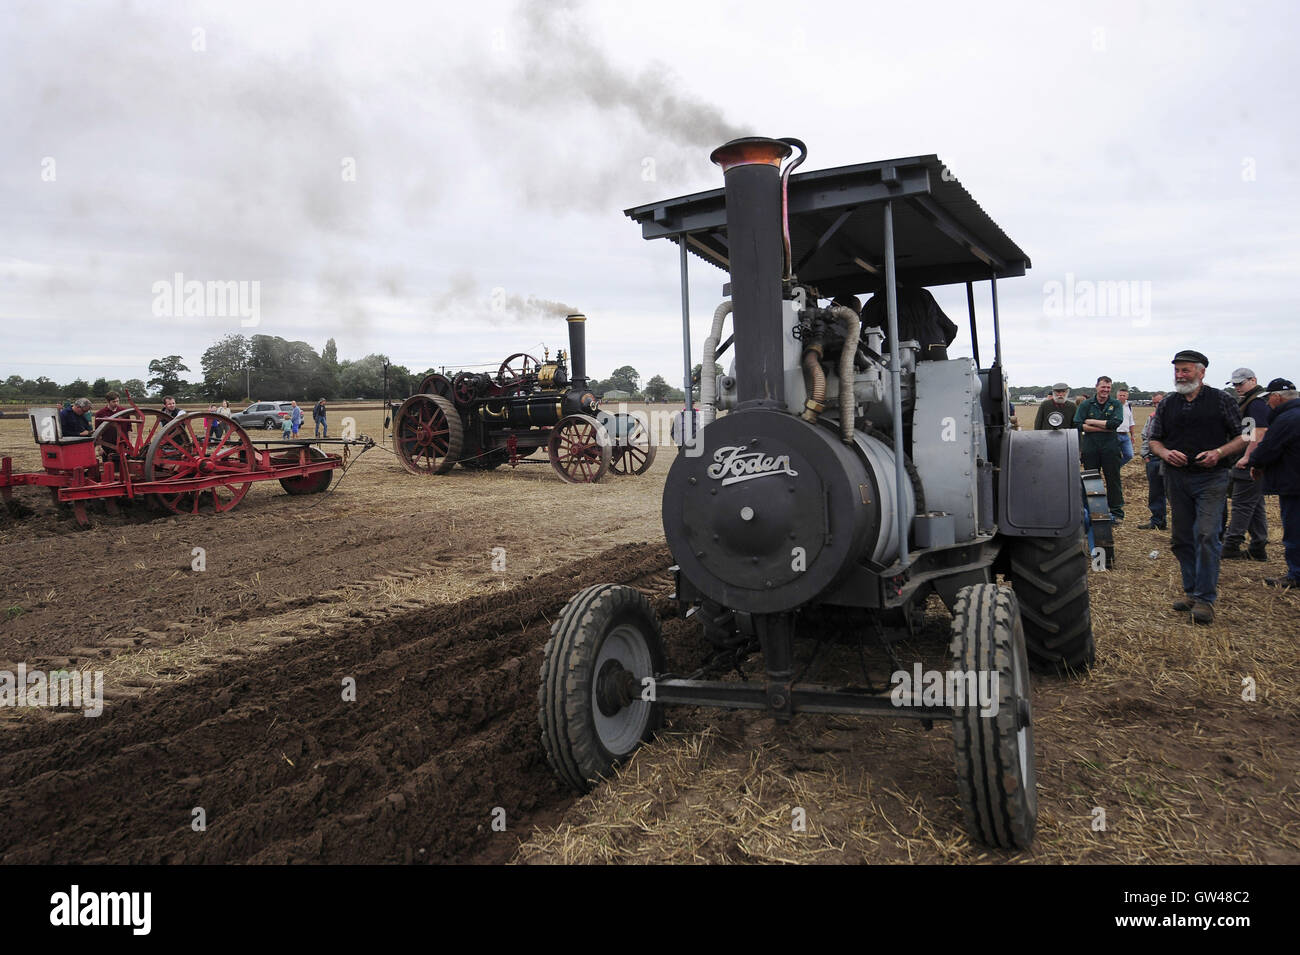 The World Ploughing Contest takes place at Crockey Hill near York, where representatives from over thirty countries competed in various categories that included vintage and horse drawn alongside conventional tractors. Stock Photo